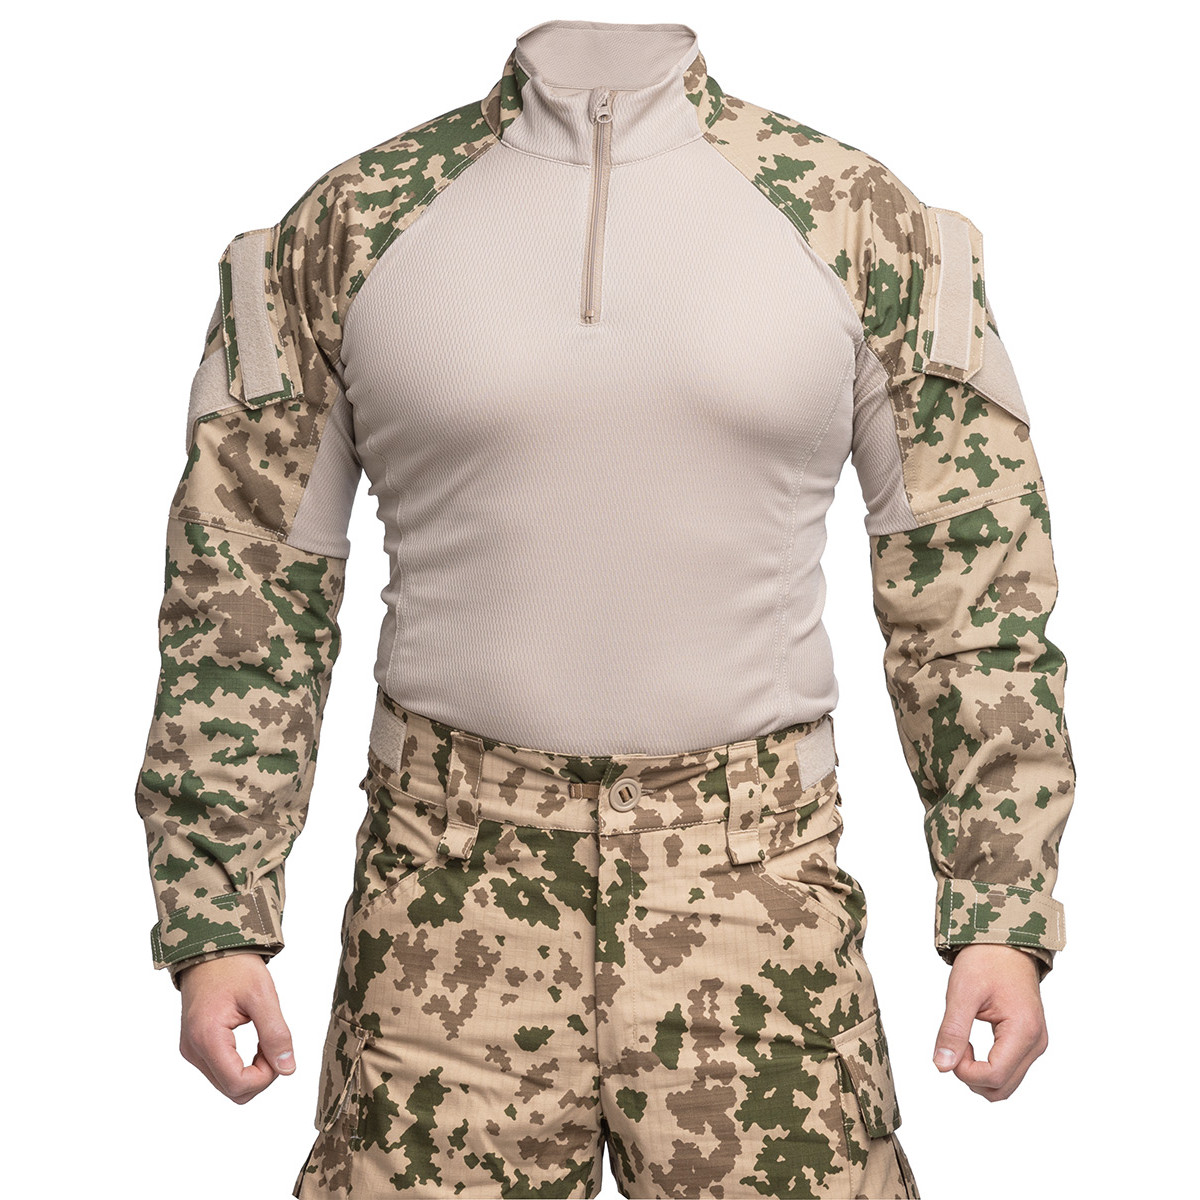 Tactical Combat Shirt Lightweight Moisture Wicking and Breathable 